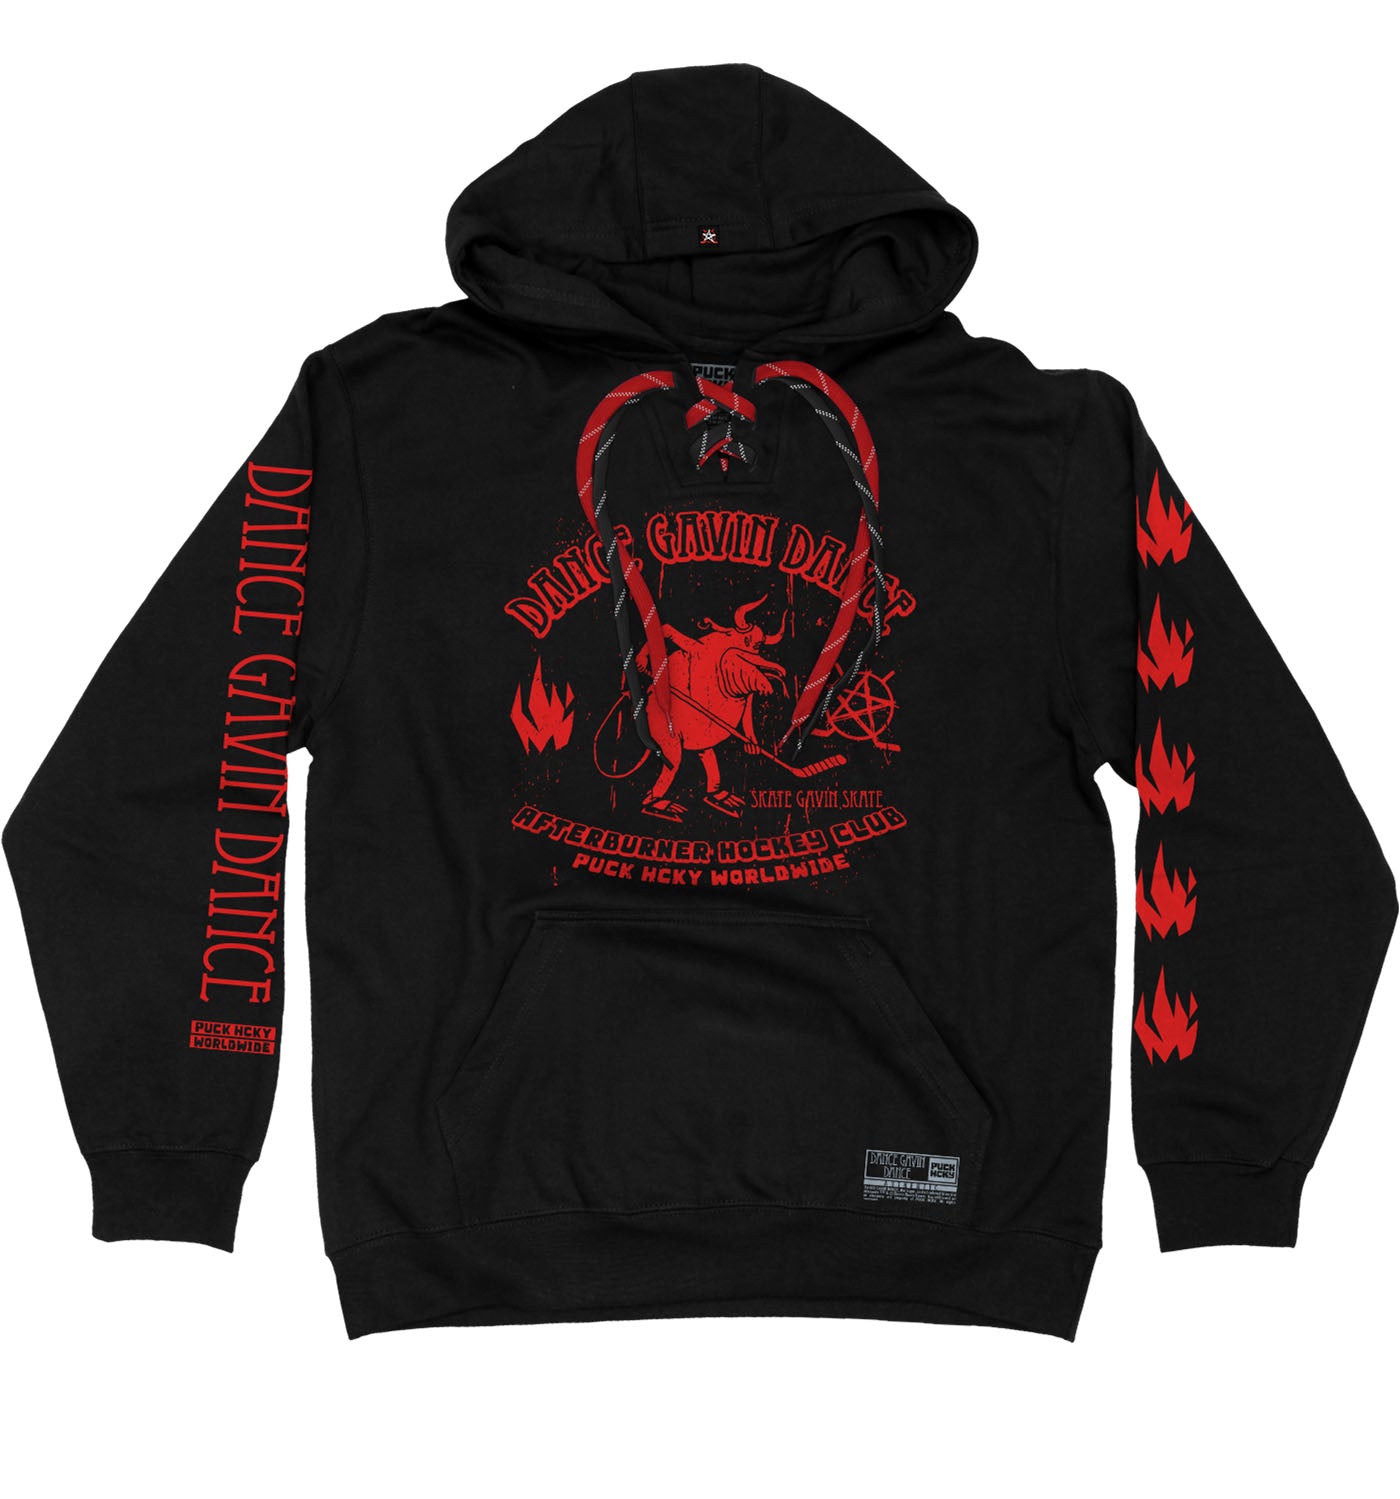 DANCE GAVIN DANCE ‘AFTERBURNER’ laced pullover hockey hoodie in black with red and black laces front view